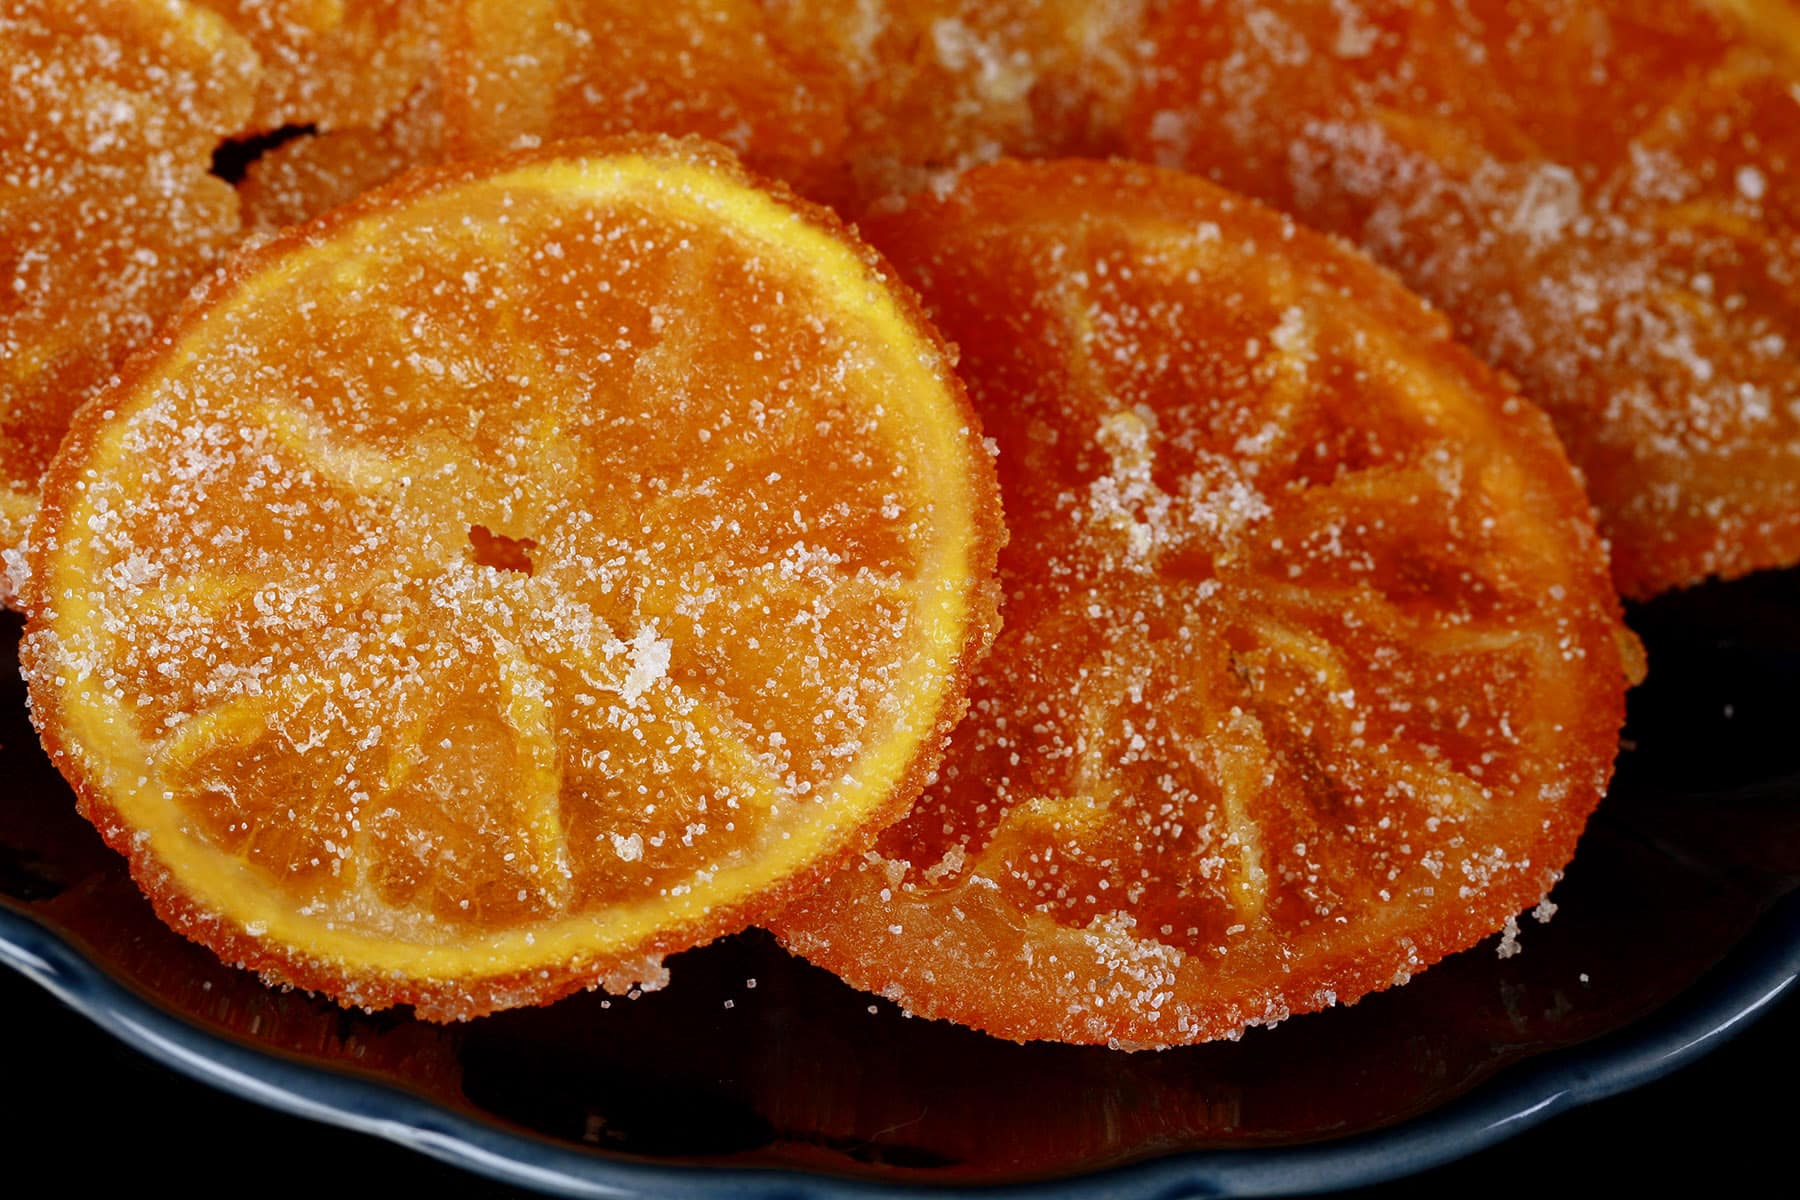 A blue plate with candied orange slices arranged on it.